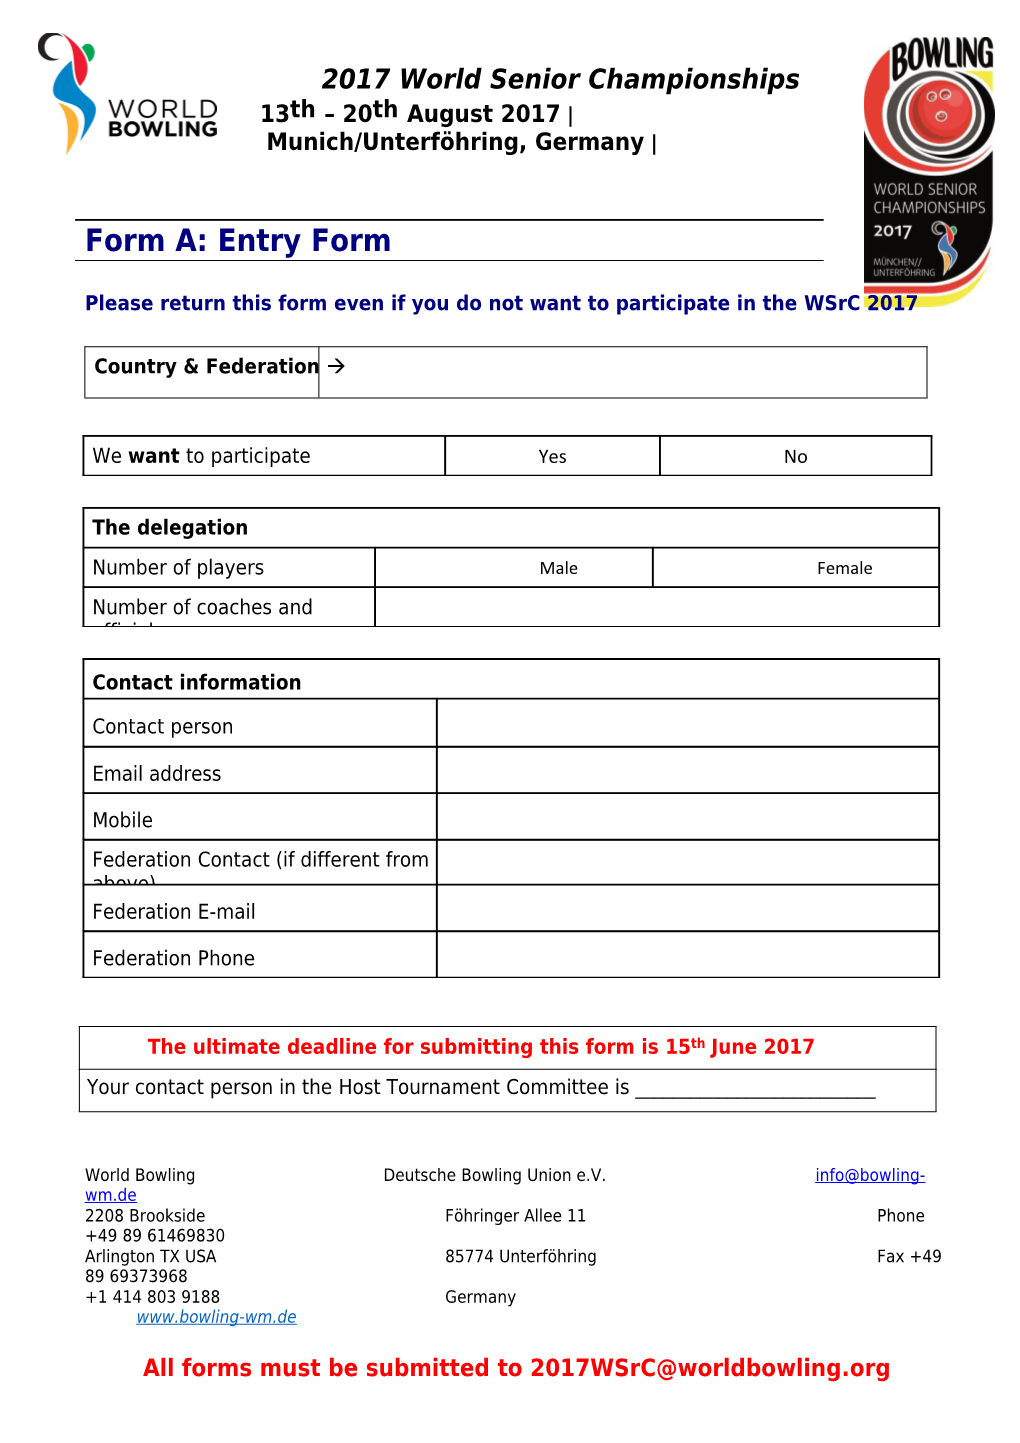 Please Return This Form Even If You Do Not Want to Participate in the Wsrc 2017